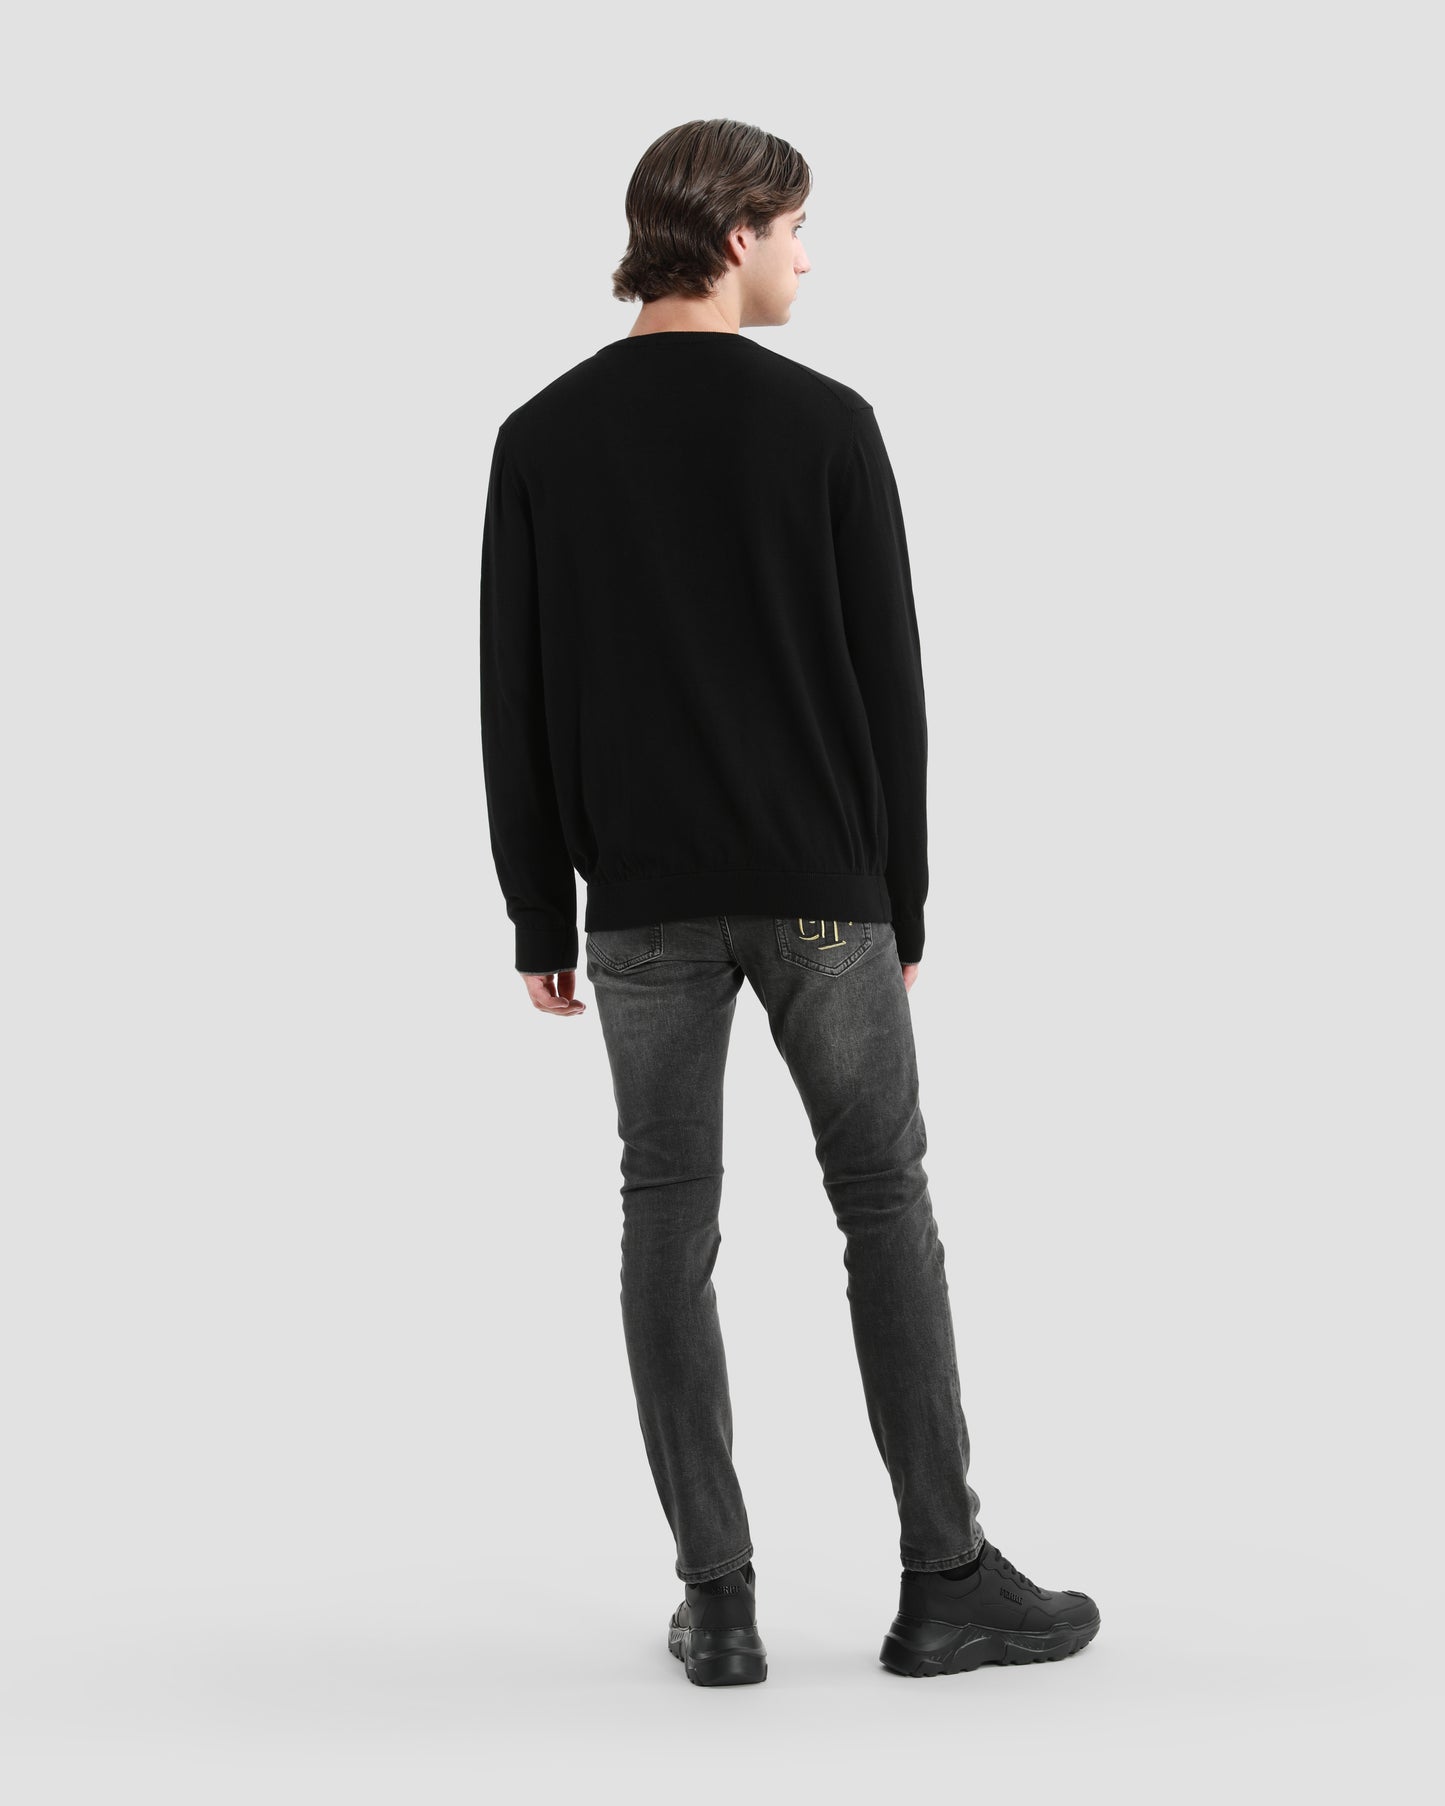 Boxed Ferre Branding Front Sweater